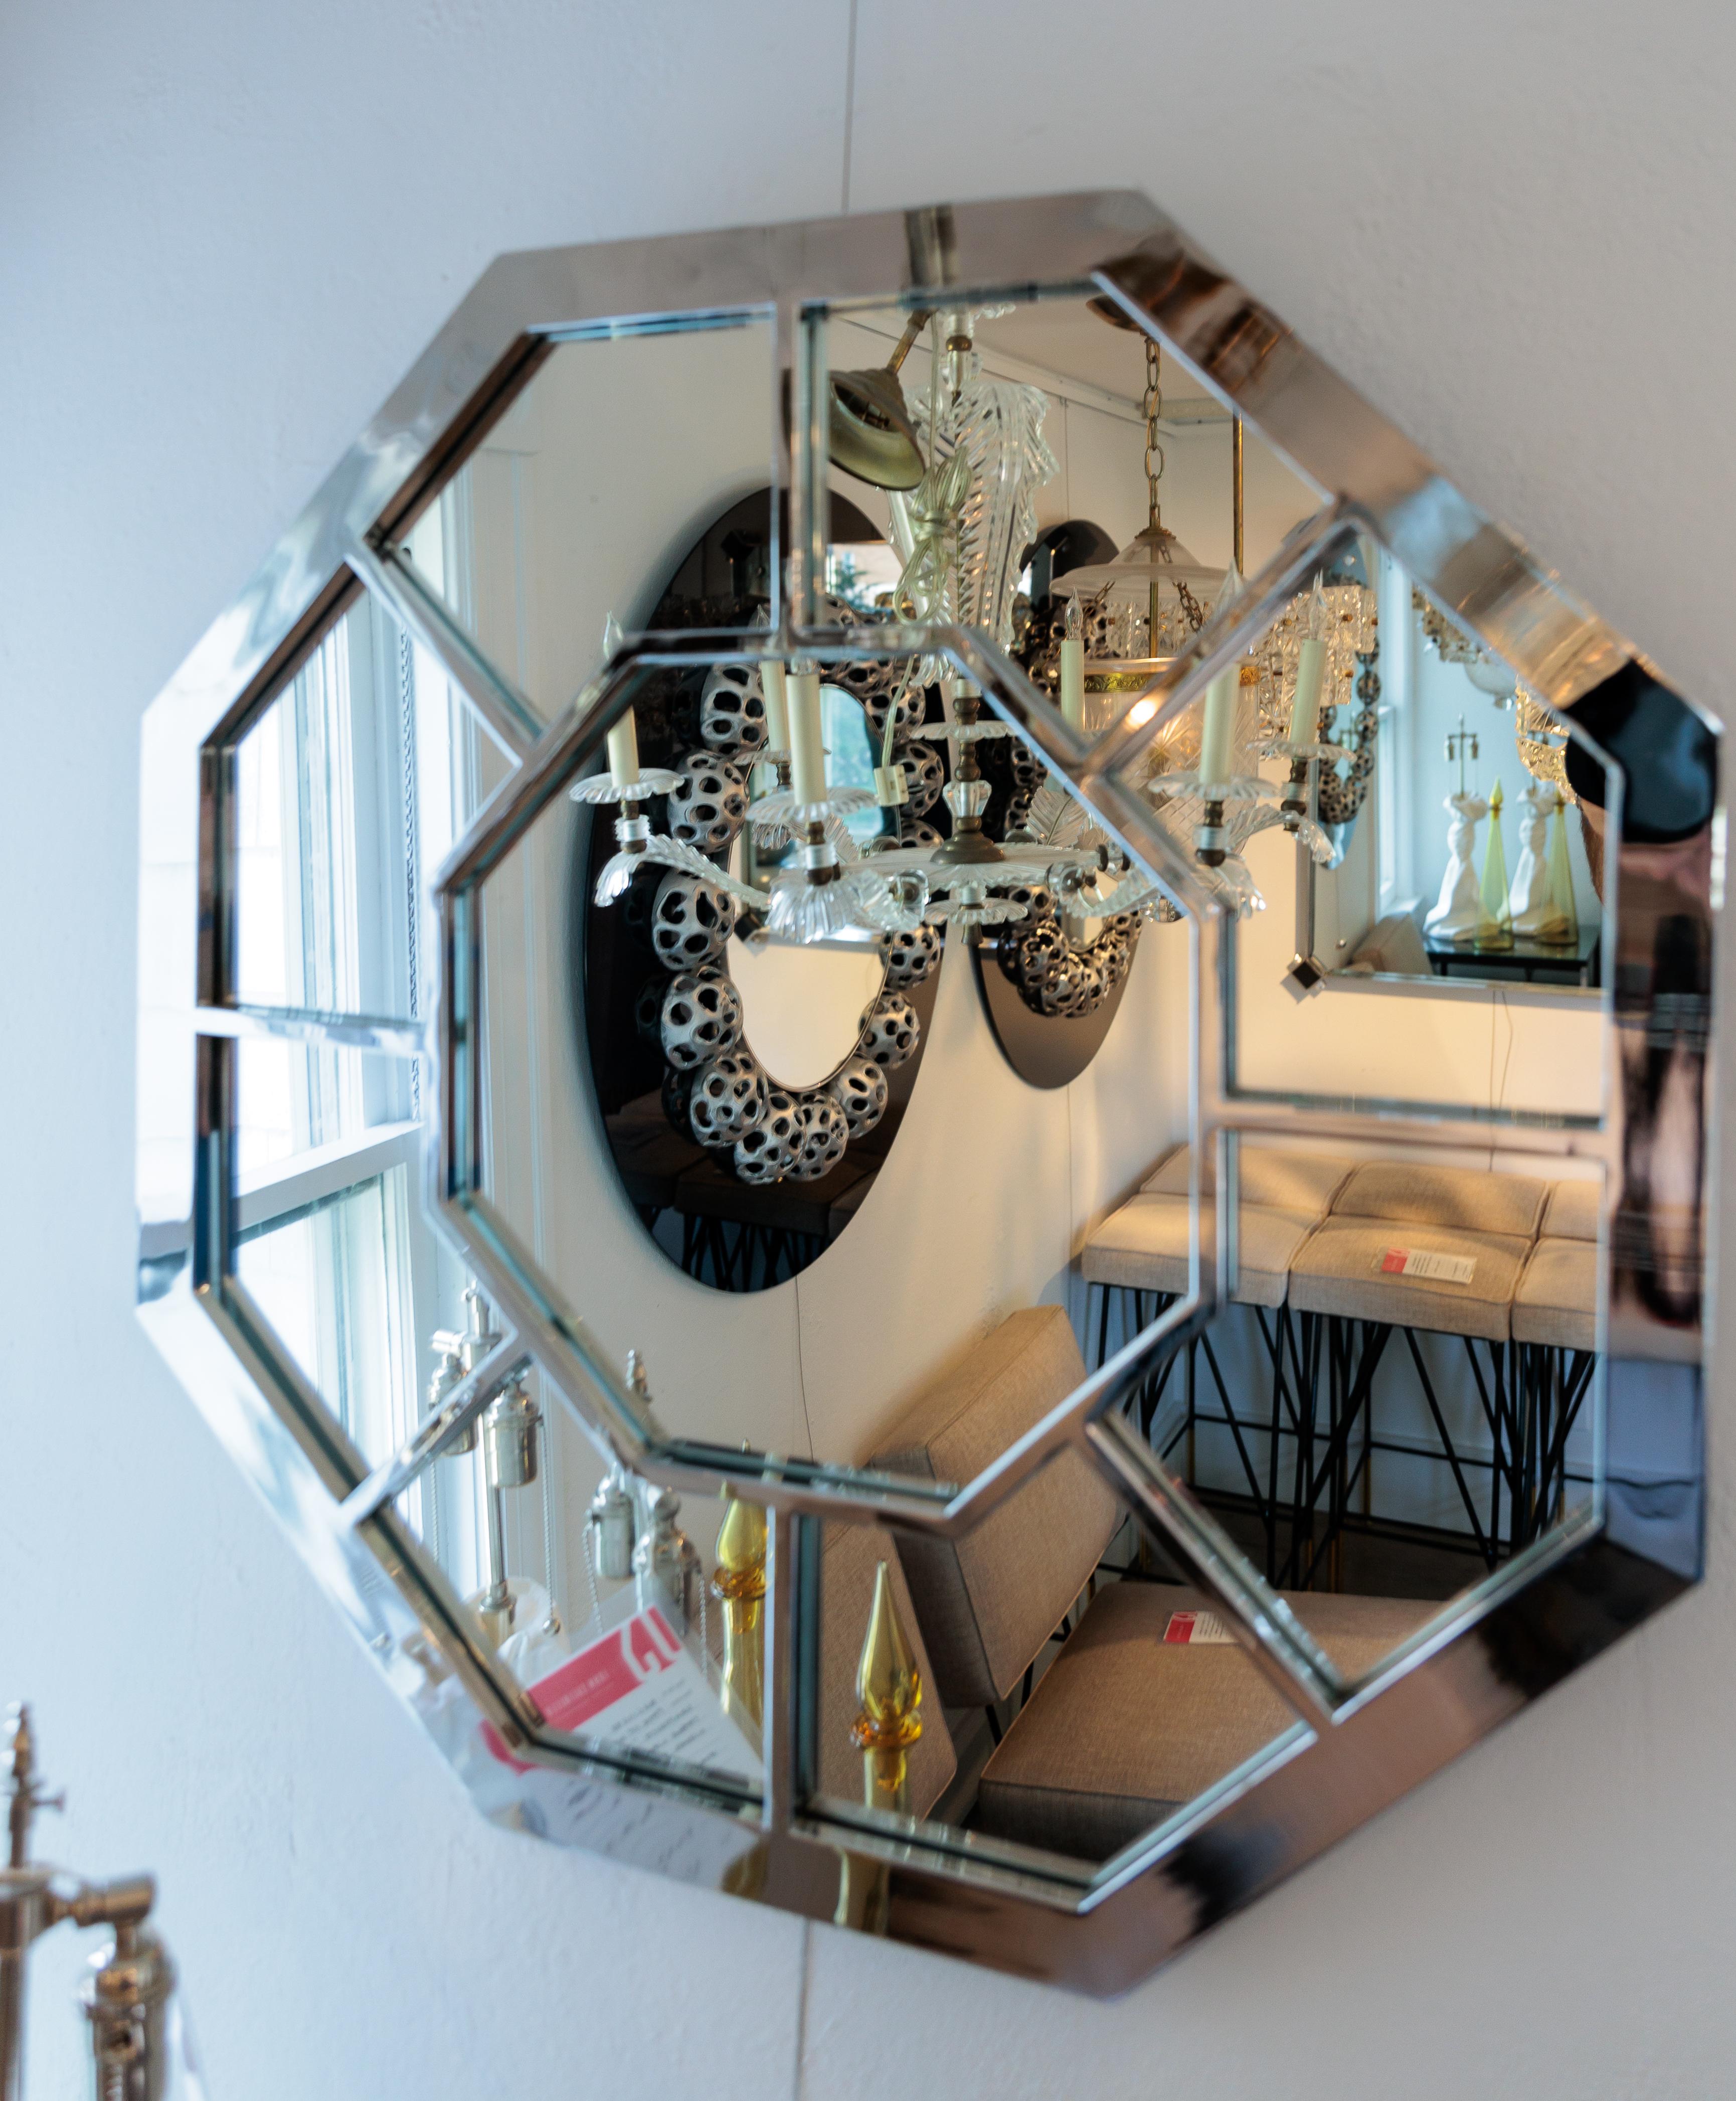 The mirror can be used in any decor.